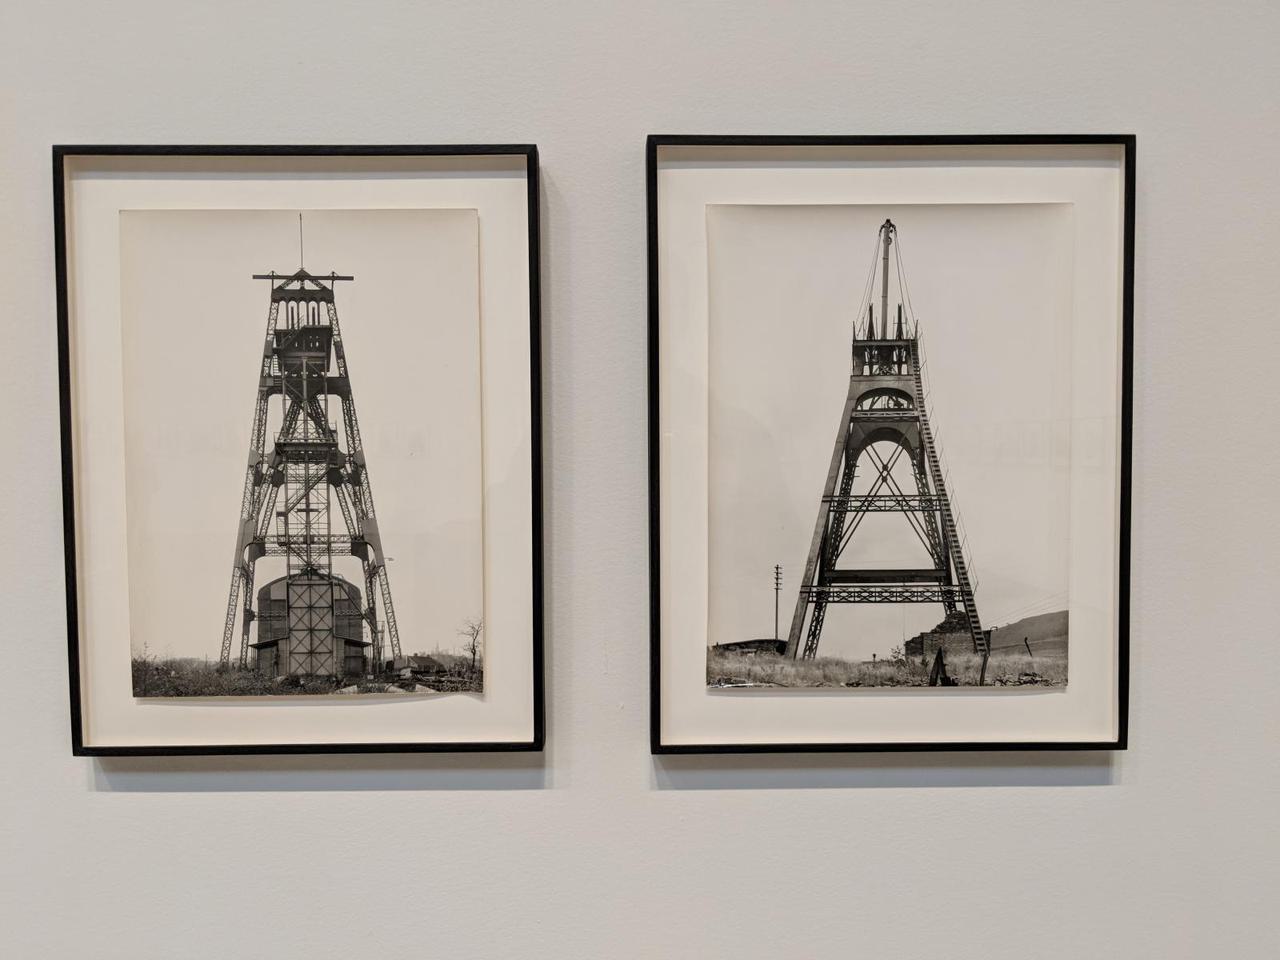 Two side-by-side photographs of two similar metal framed structures, several stories high.